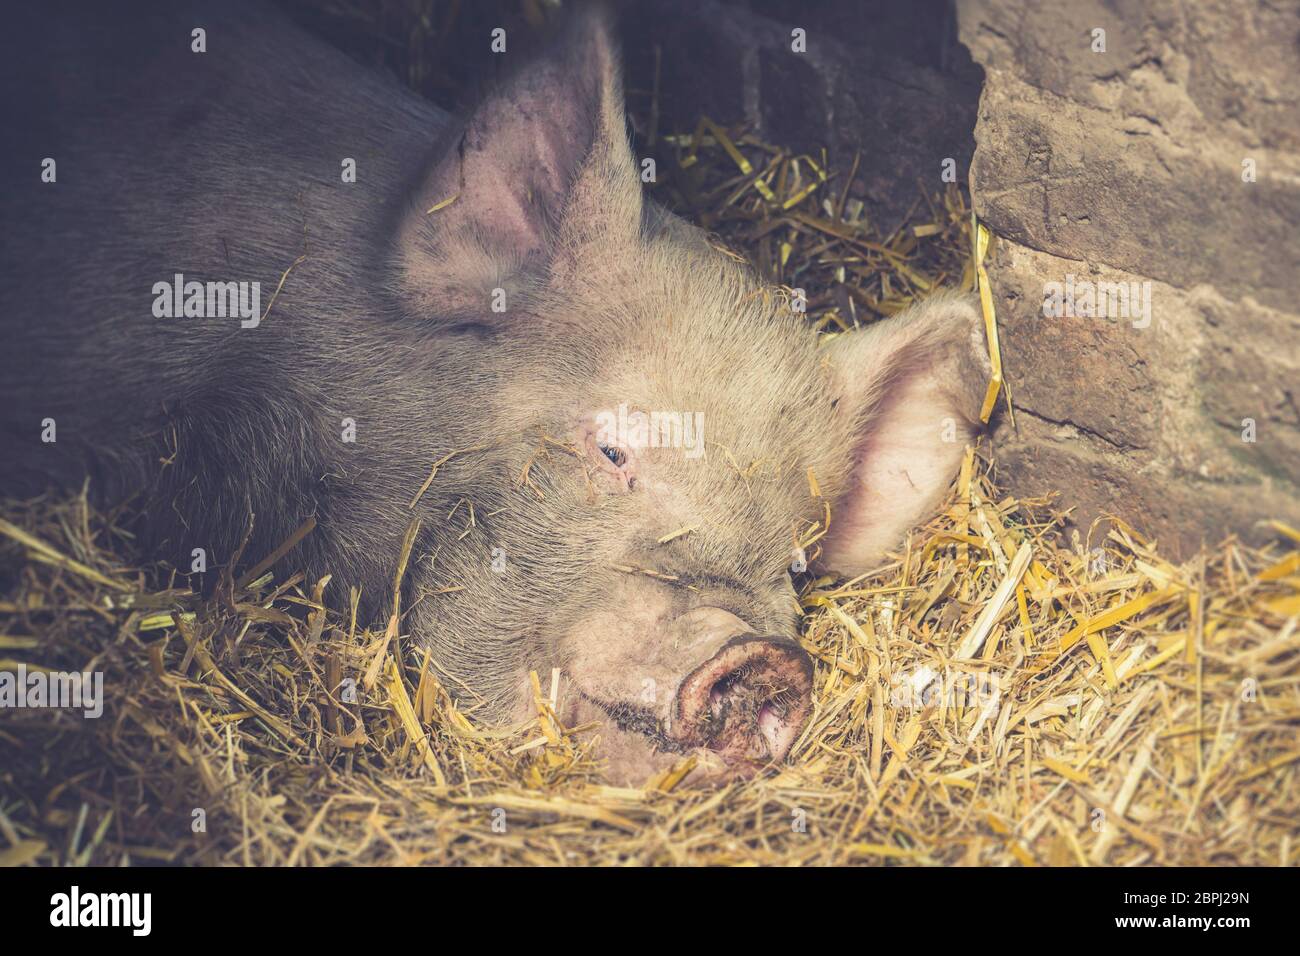 Close up of cute sleeping pig (Sus) isolated in straw in barn doorway, enjoying summer sunshine, UK. Animal pig face with dirty nose lying down asleep. Stock Photo